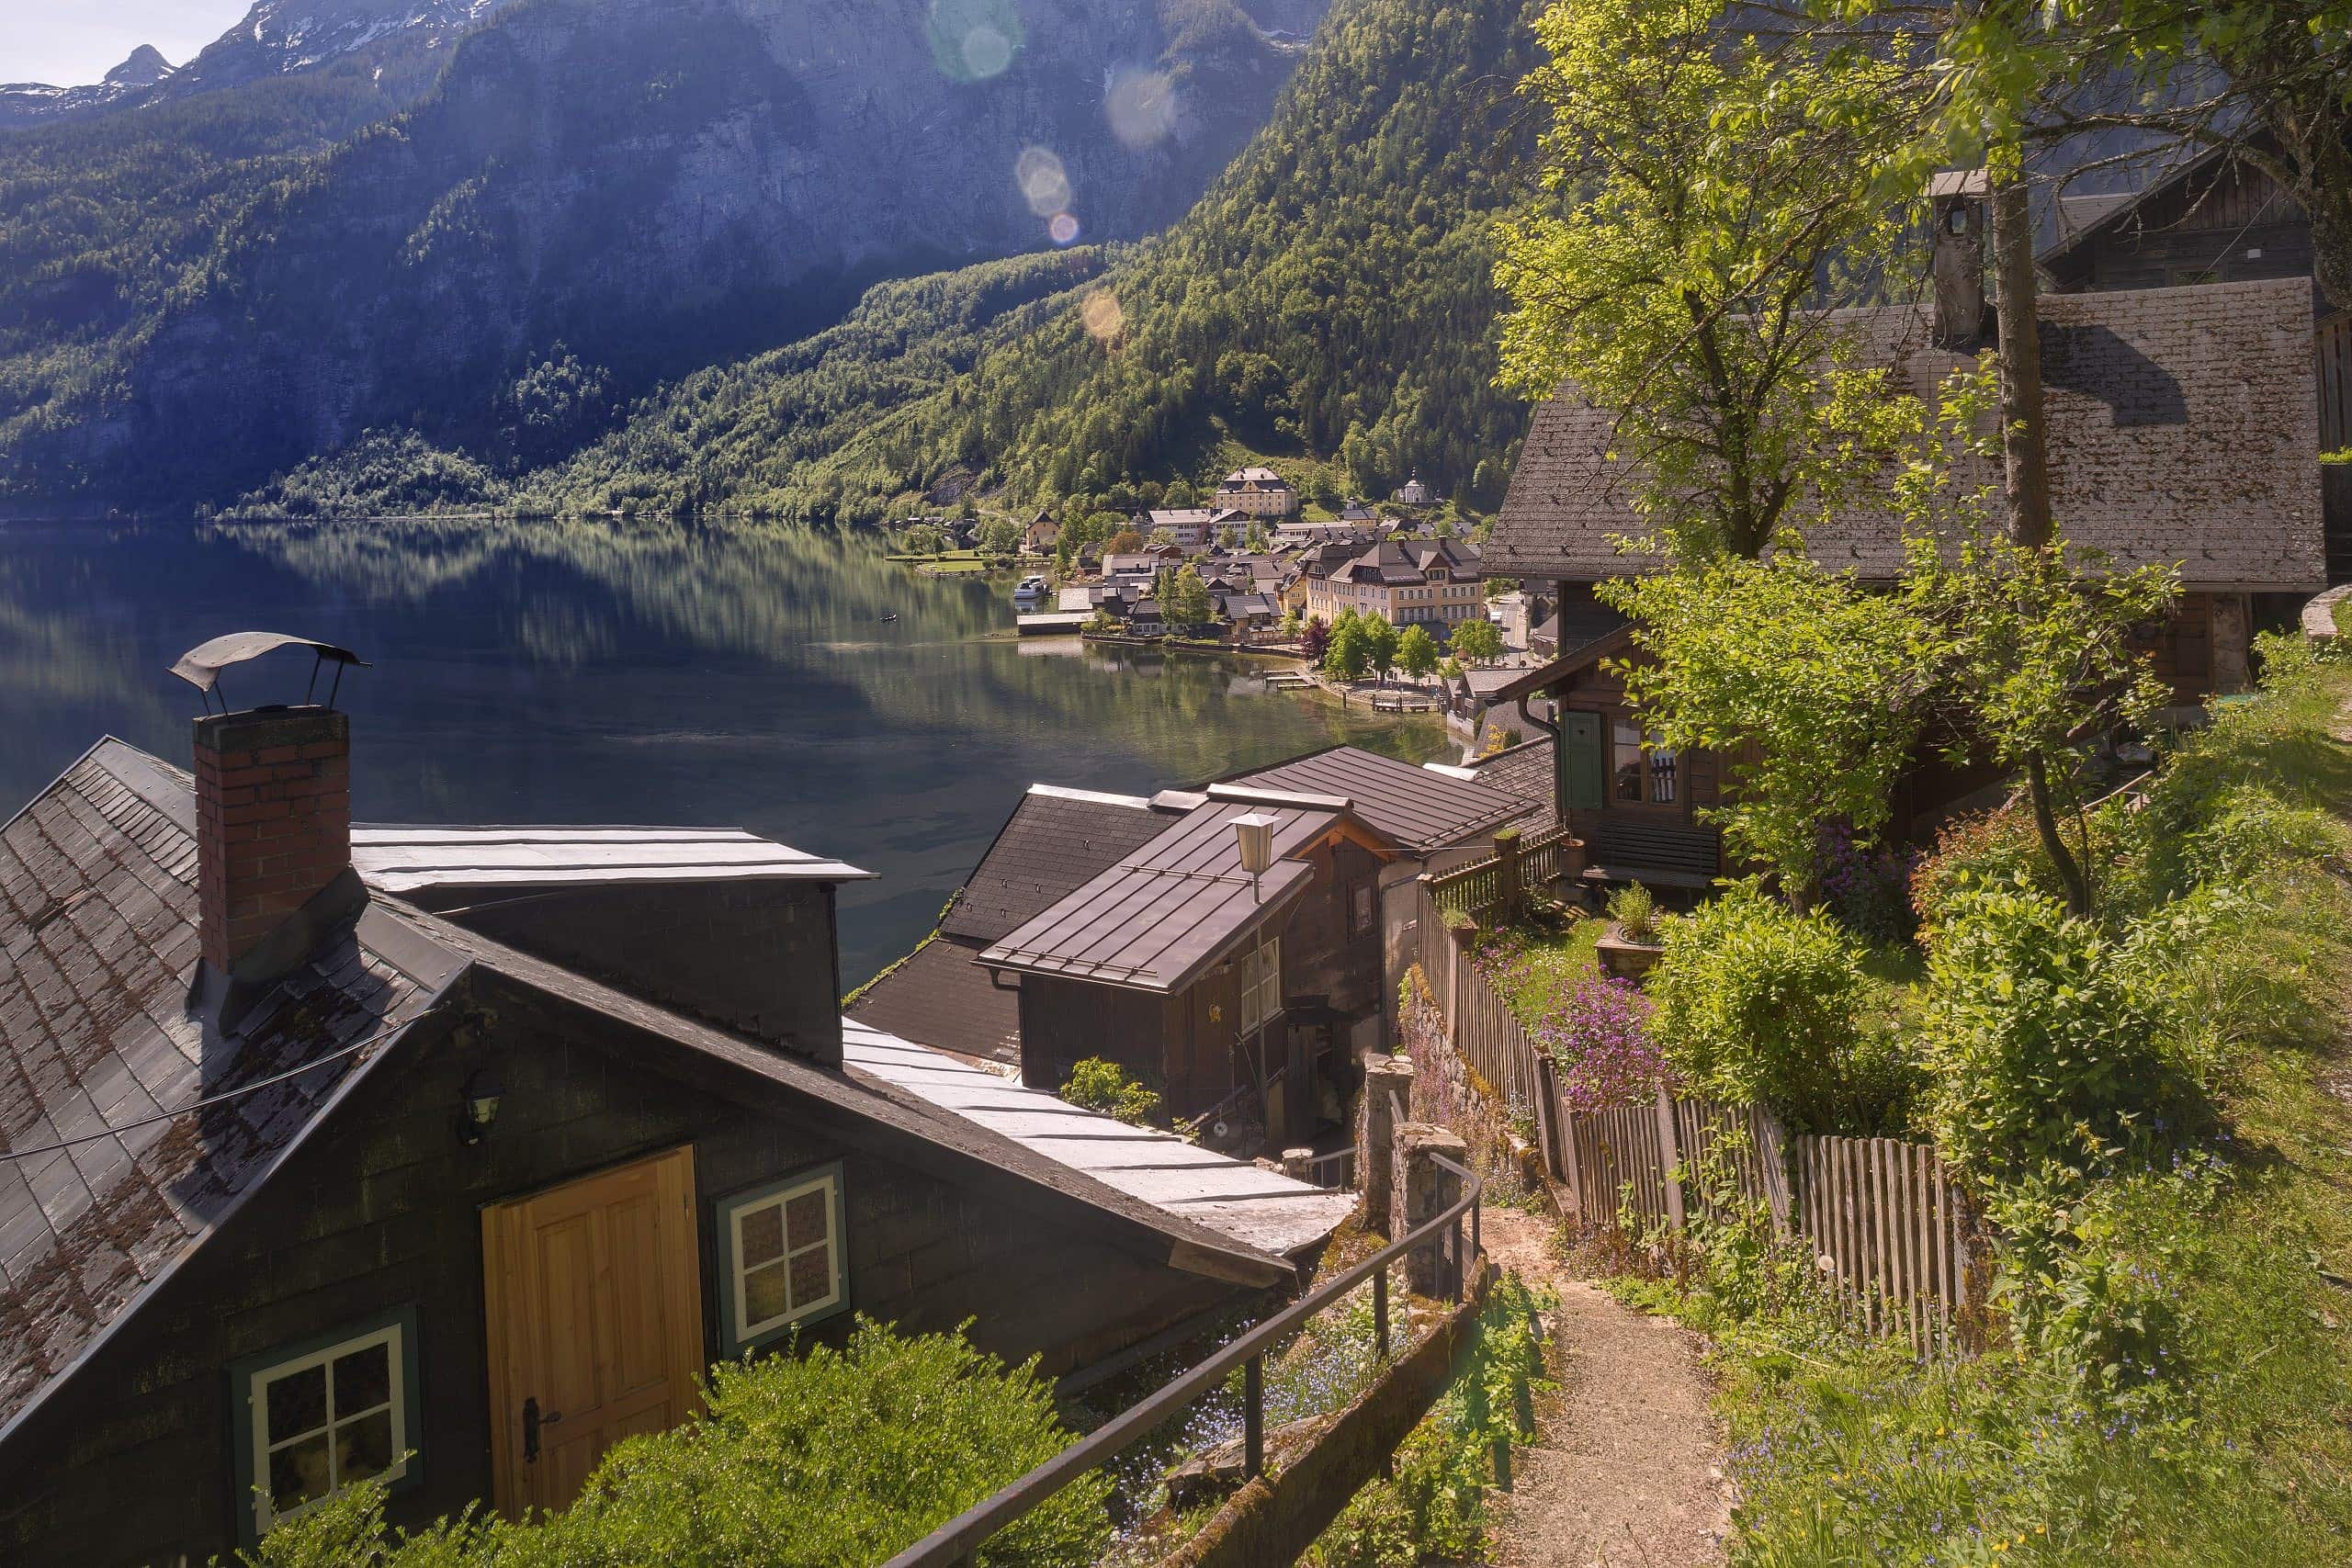 Looking down the narrow path towards the Town of Hallstatt from half way up the Hill.